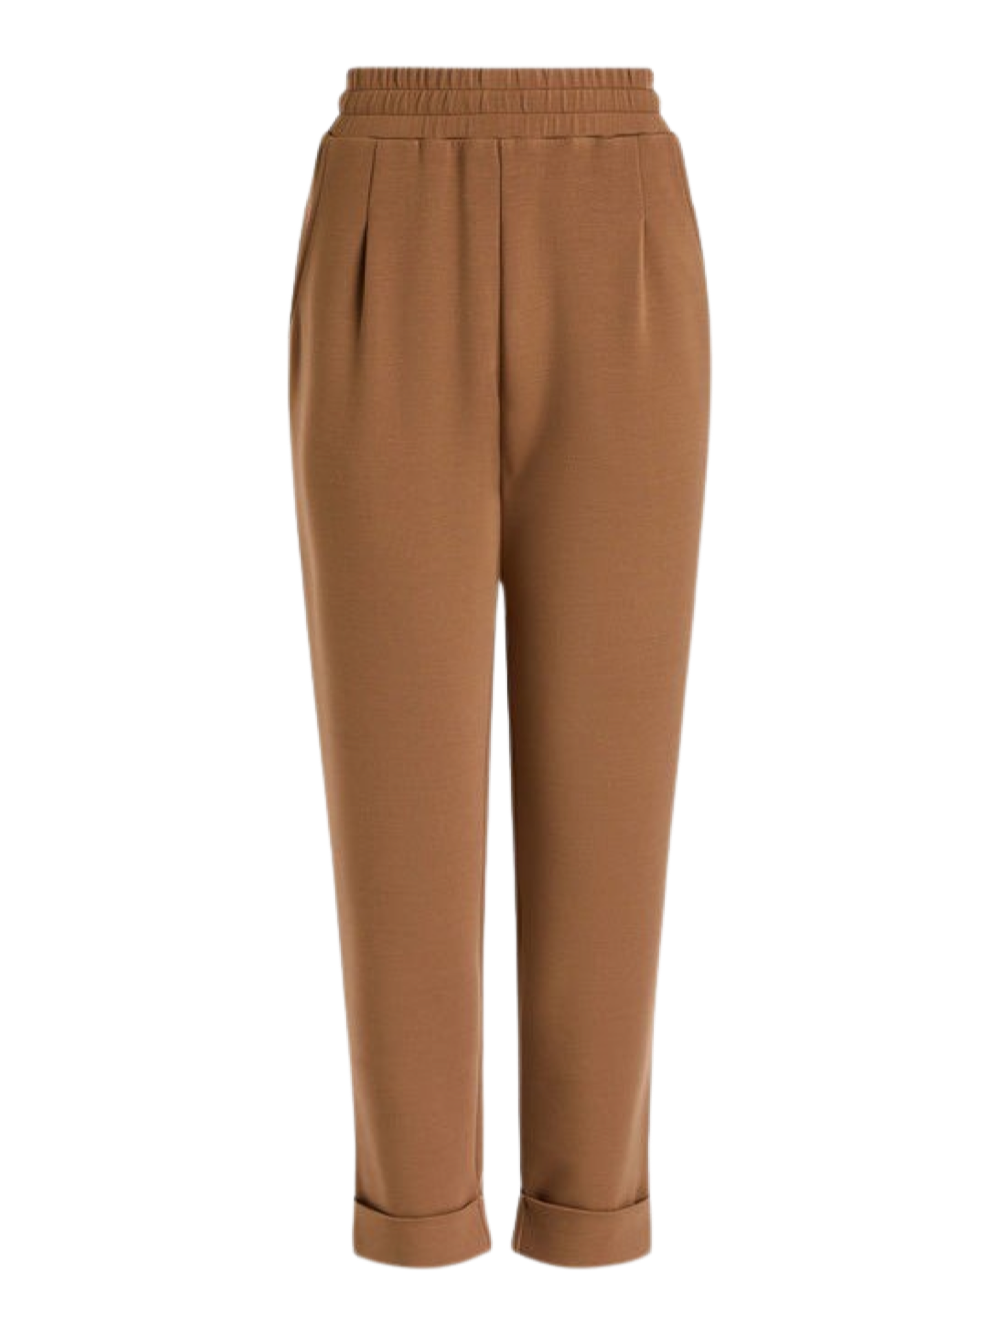 Varley The Rolled Cuff Pant (More Colors)